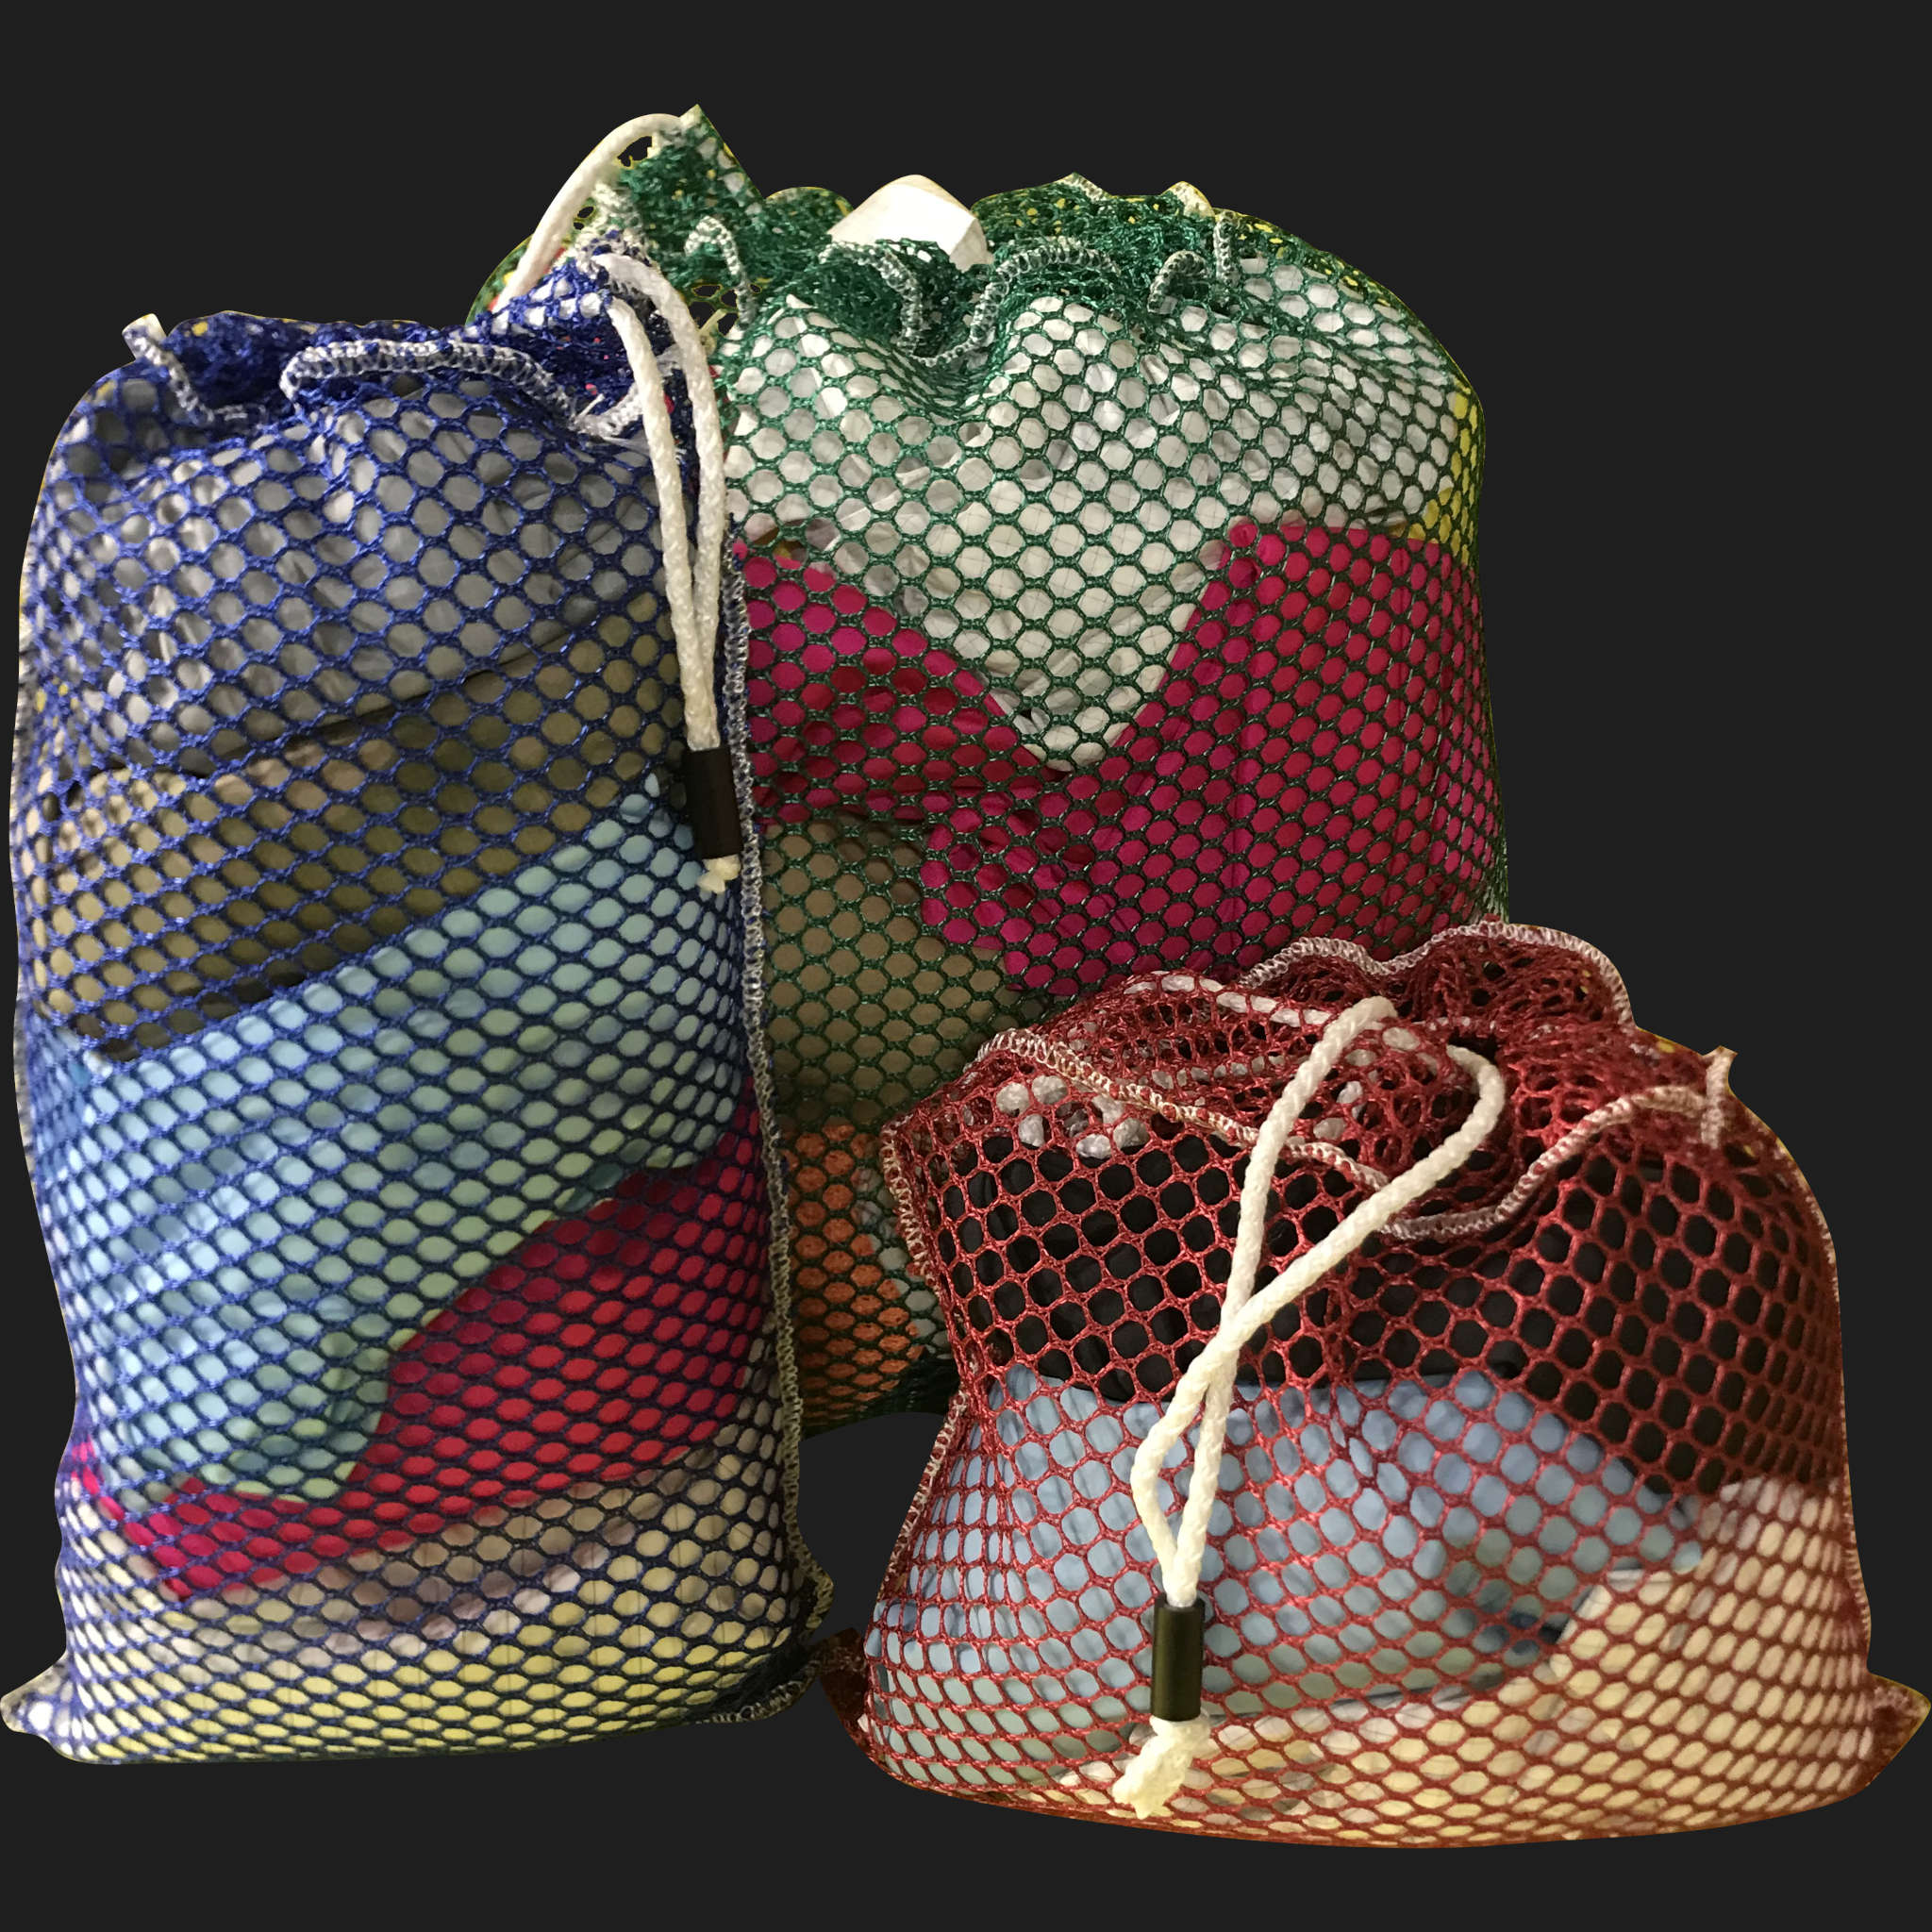 36" x 56" Customized Mesh-Net-Laundry Bags Heavy Duty with Cord and barrellock closure